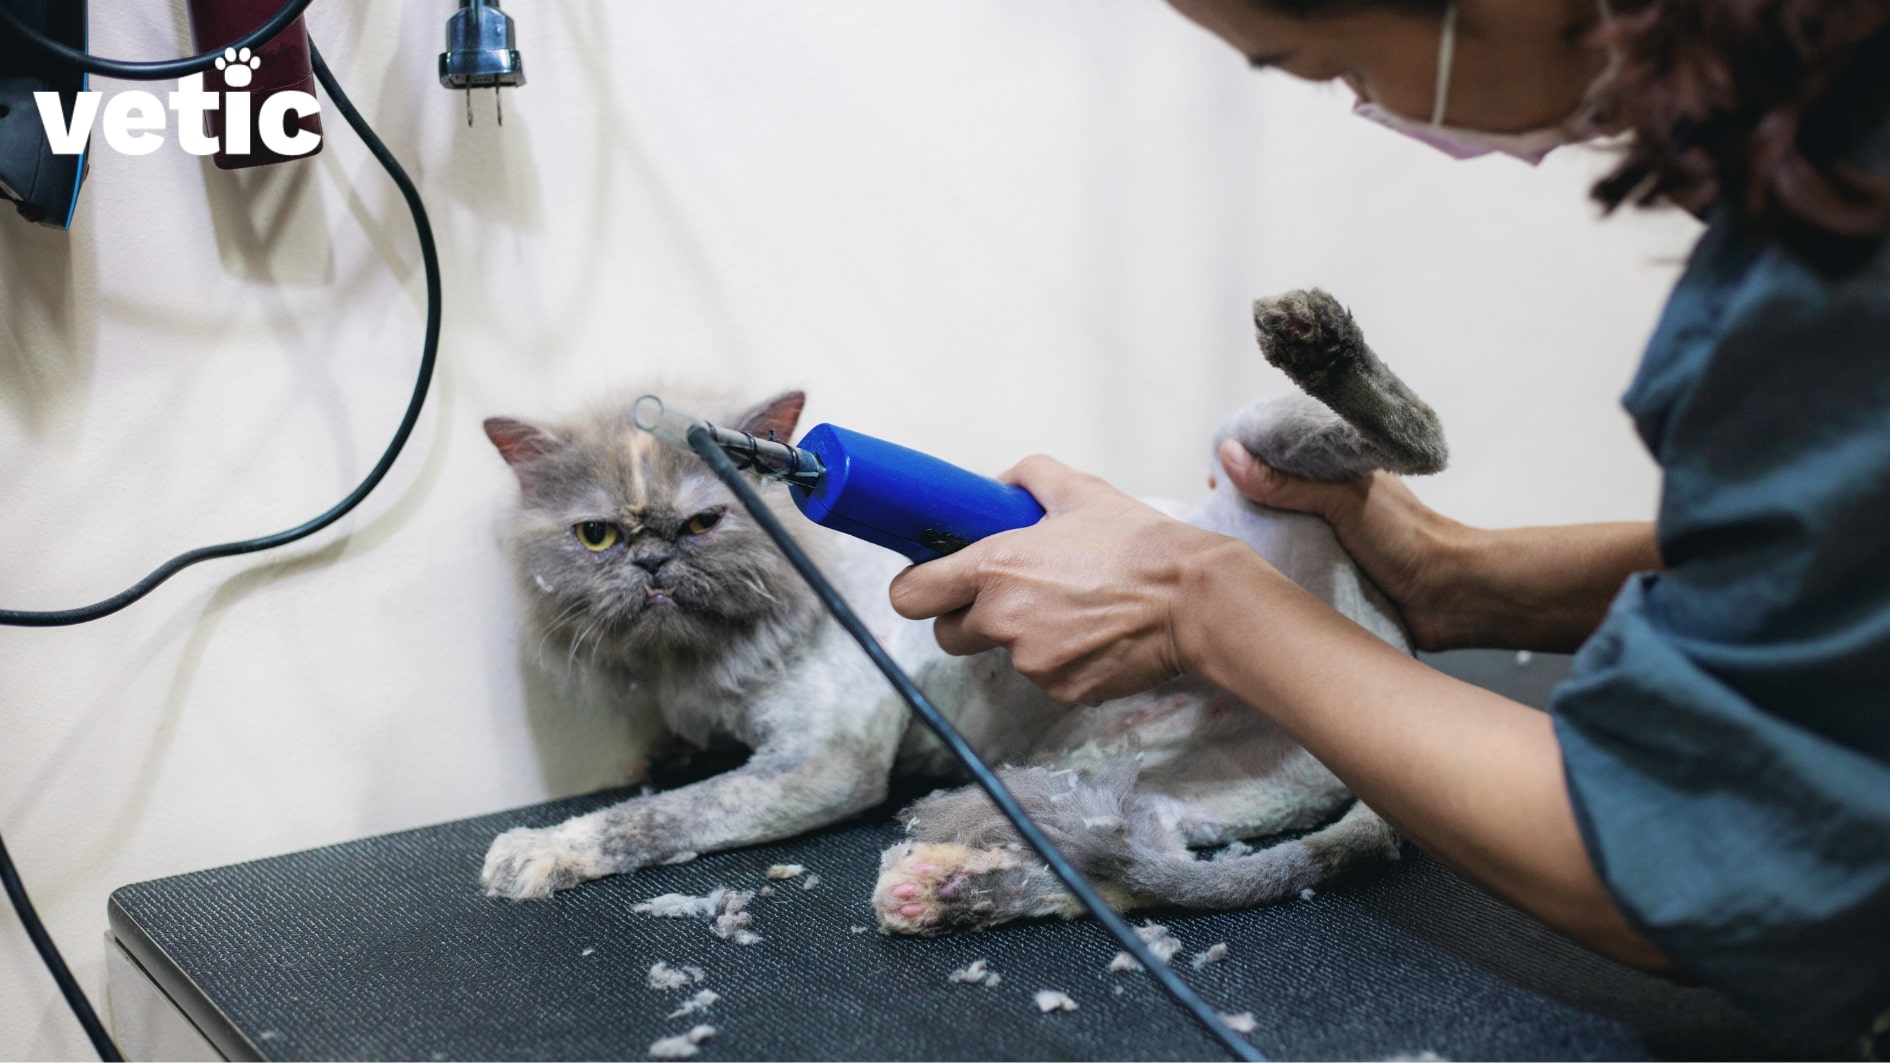 A grey cat who looks positively unhappy is being given a close trim by a woman who's a grooming professional. only part of the woman's face is visible since the photo is taken from the back. trimming periodically can help manage shedding in cats.